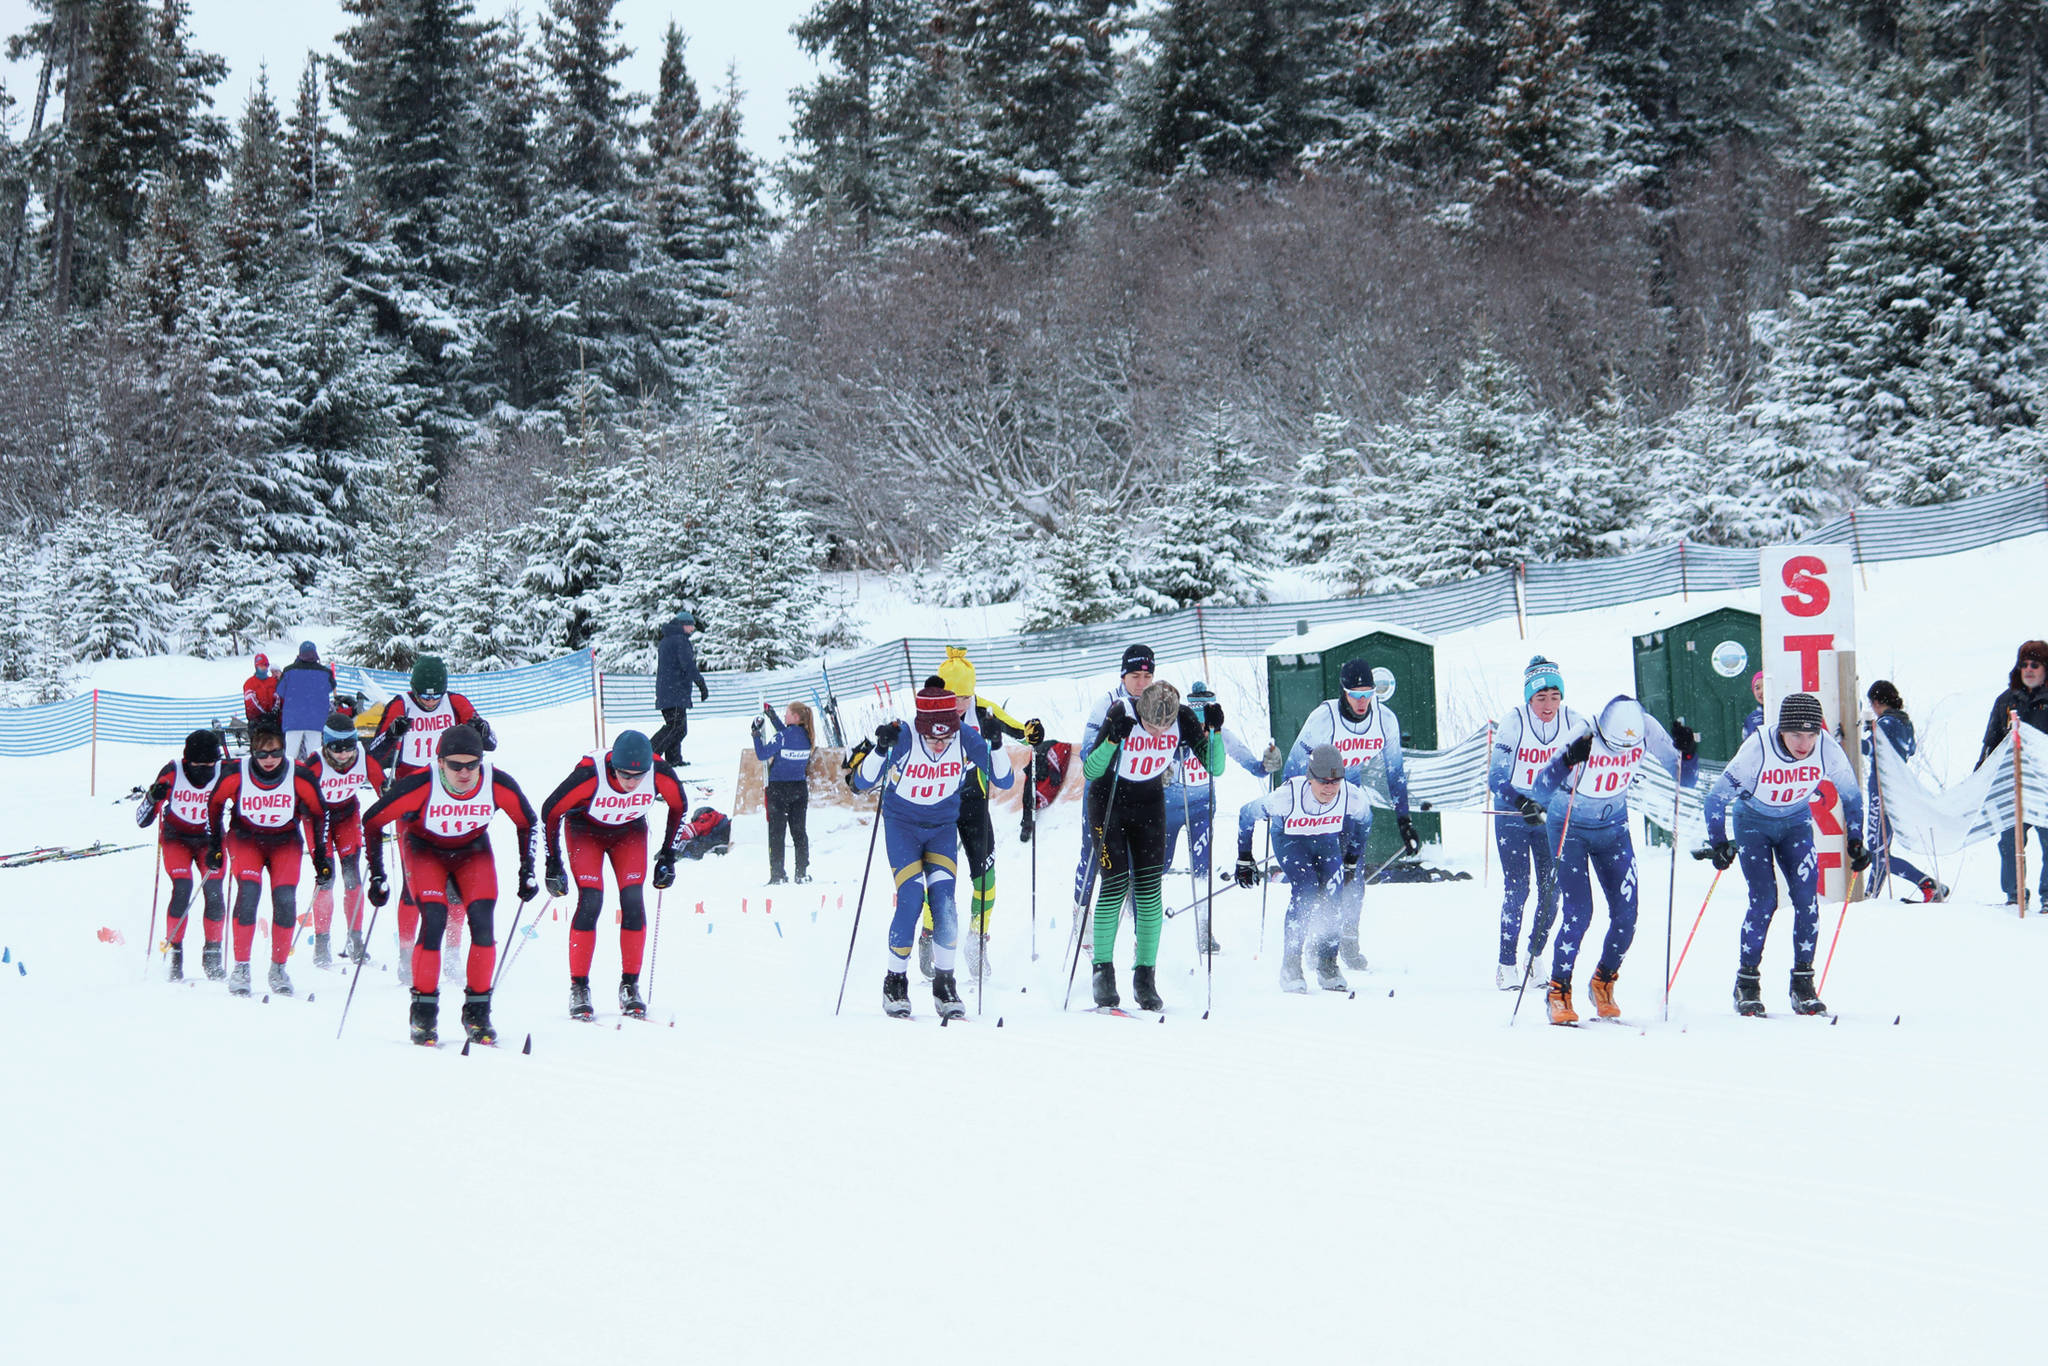 Varsity boy skiers from Kenai, Homer, Soldotna and Seward take off in the mass start 5-kilometer classic race Friday, Jan. 31, 2020 during the Homer Invite at the Lookout Mountain Trails on Ohlson Mountain Road near Homer, Alaska. (Photo by Megan Pacer/Homer News)